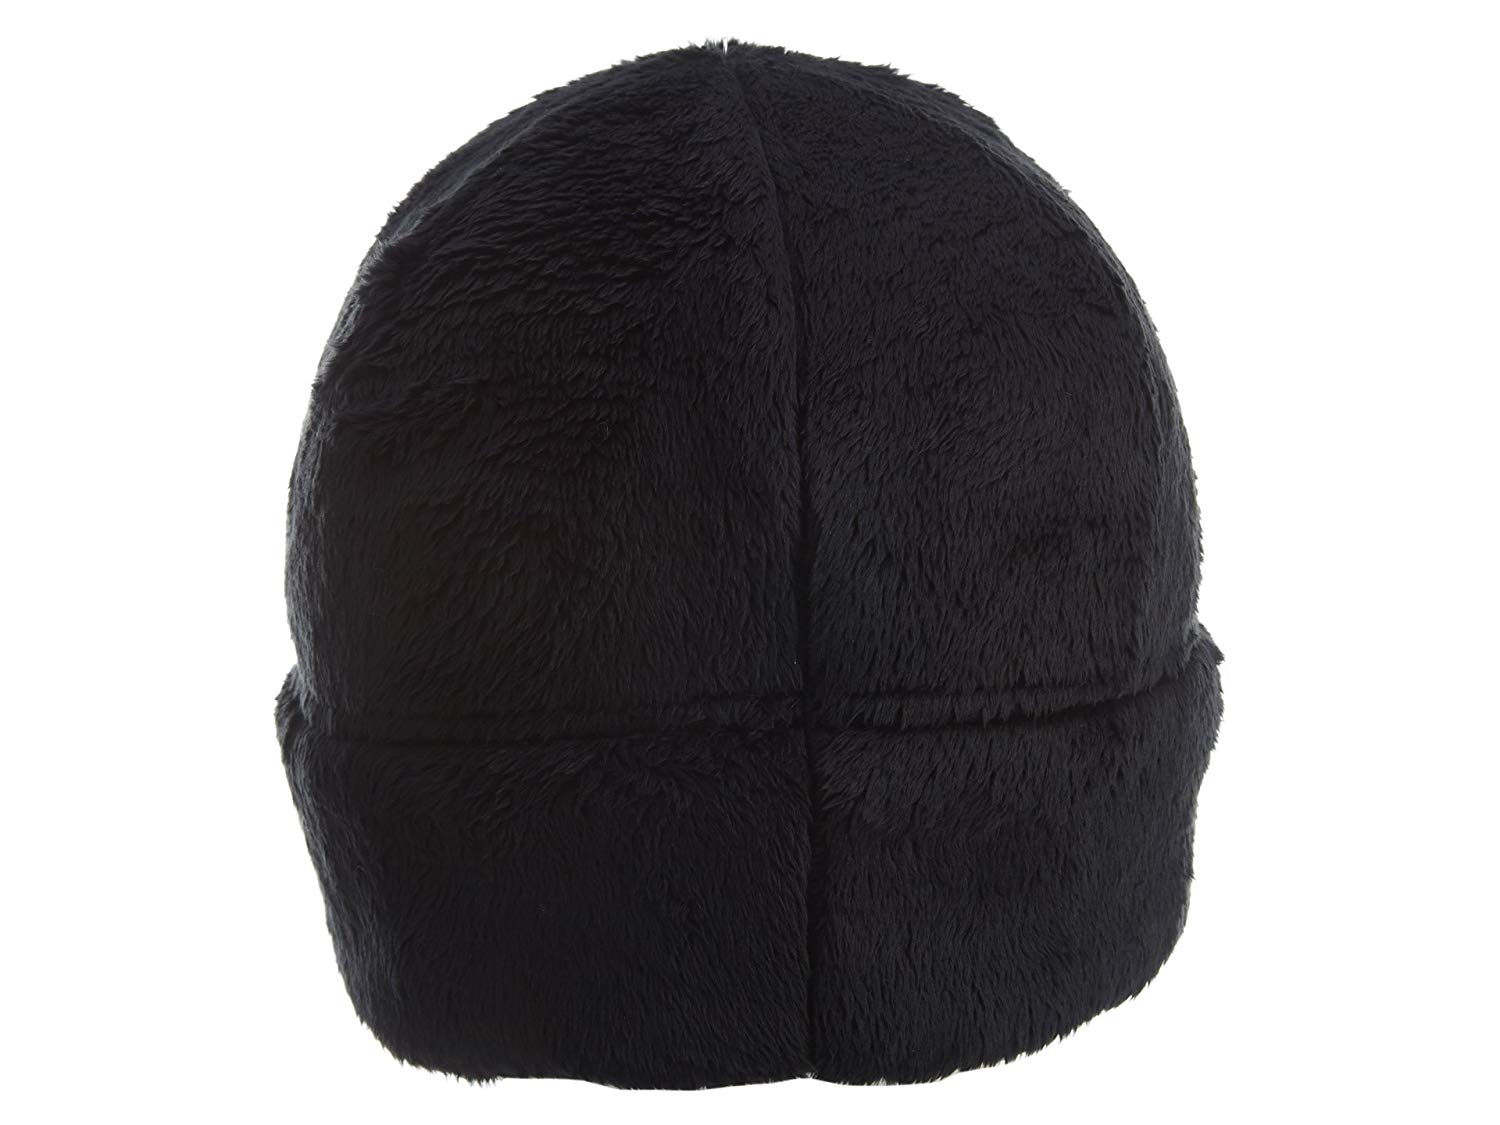 The North Face Denali Thermal Beanie The North Face ktmart.vn 1